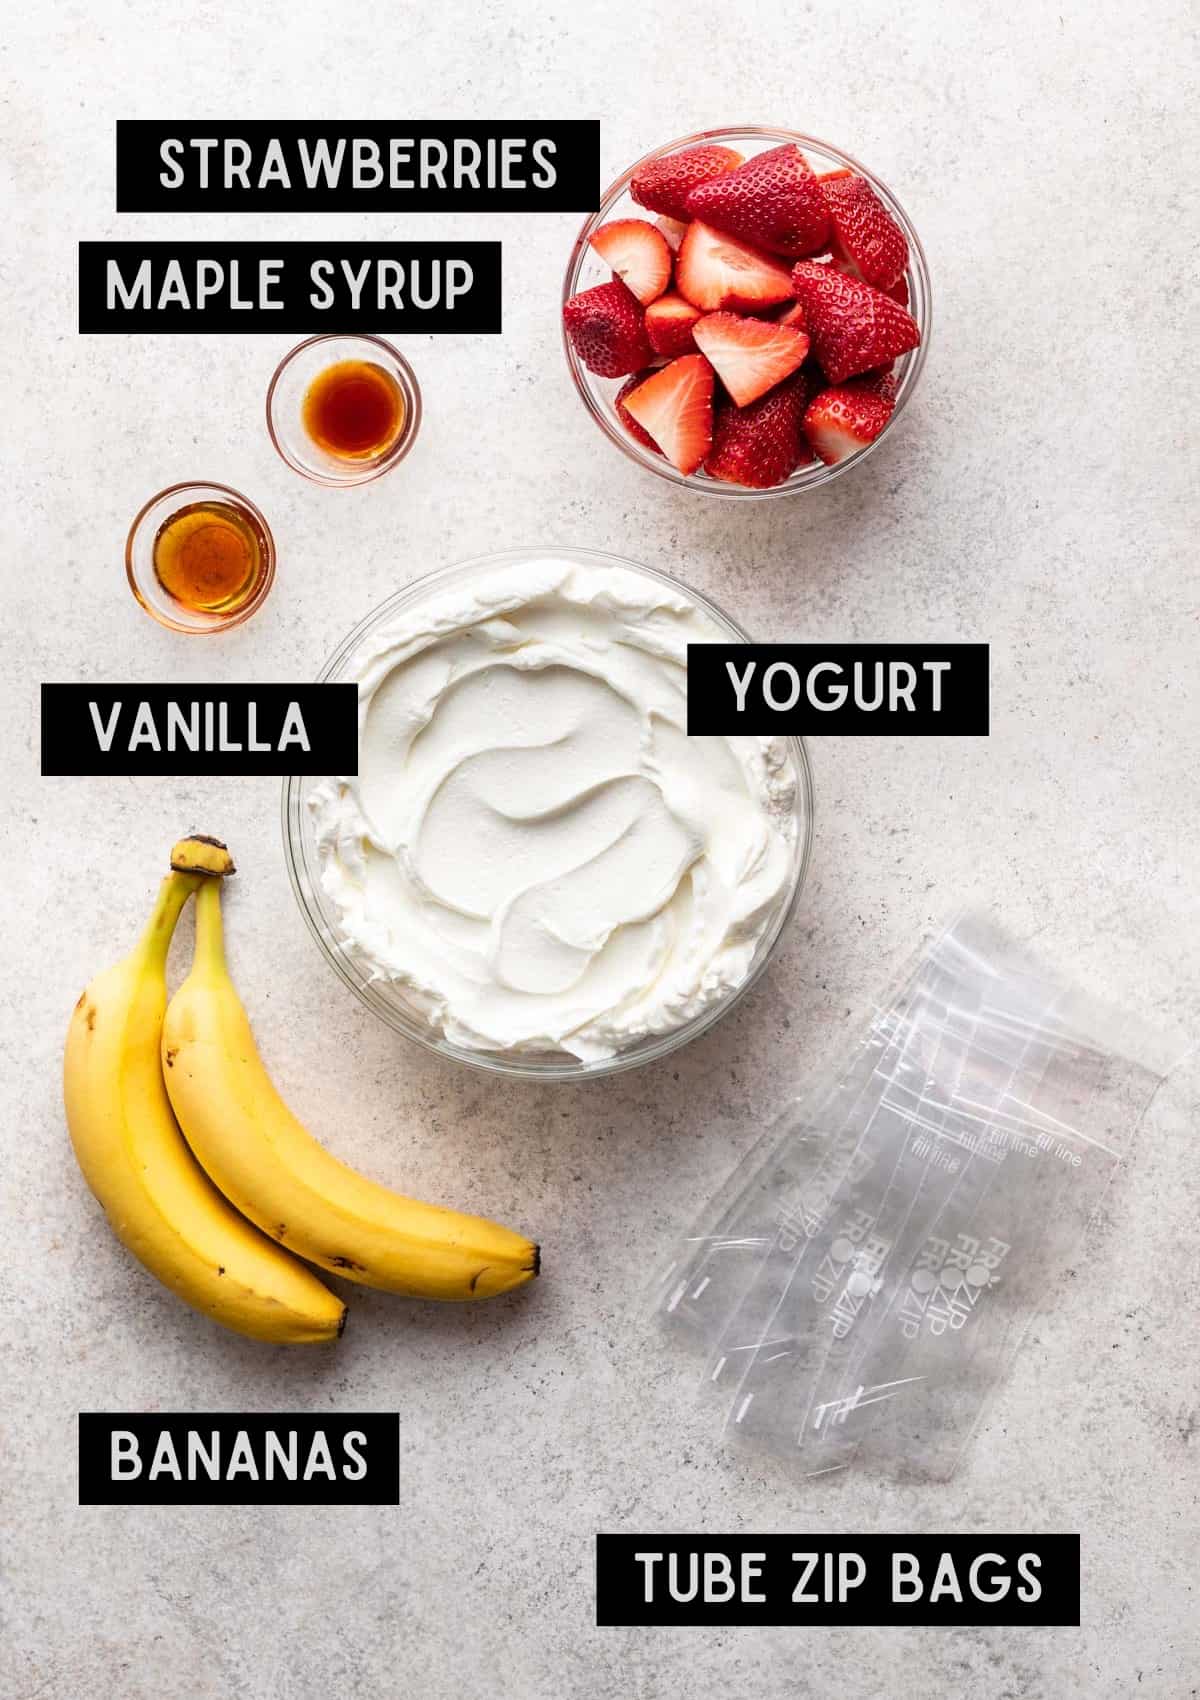 Labelled ingredients for strawberry banana gogurts (see recipe for details).